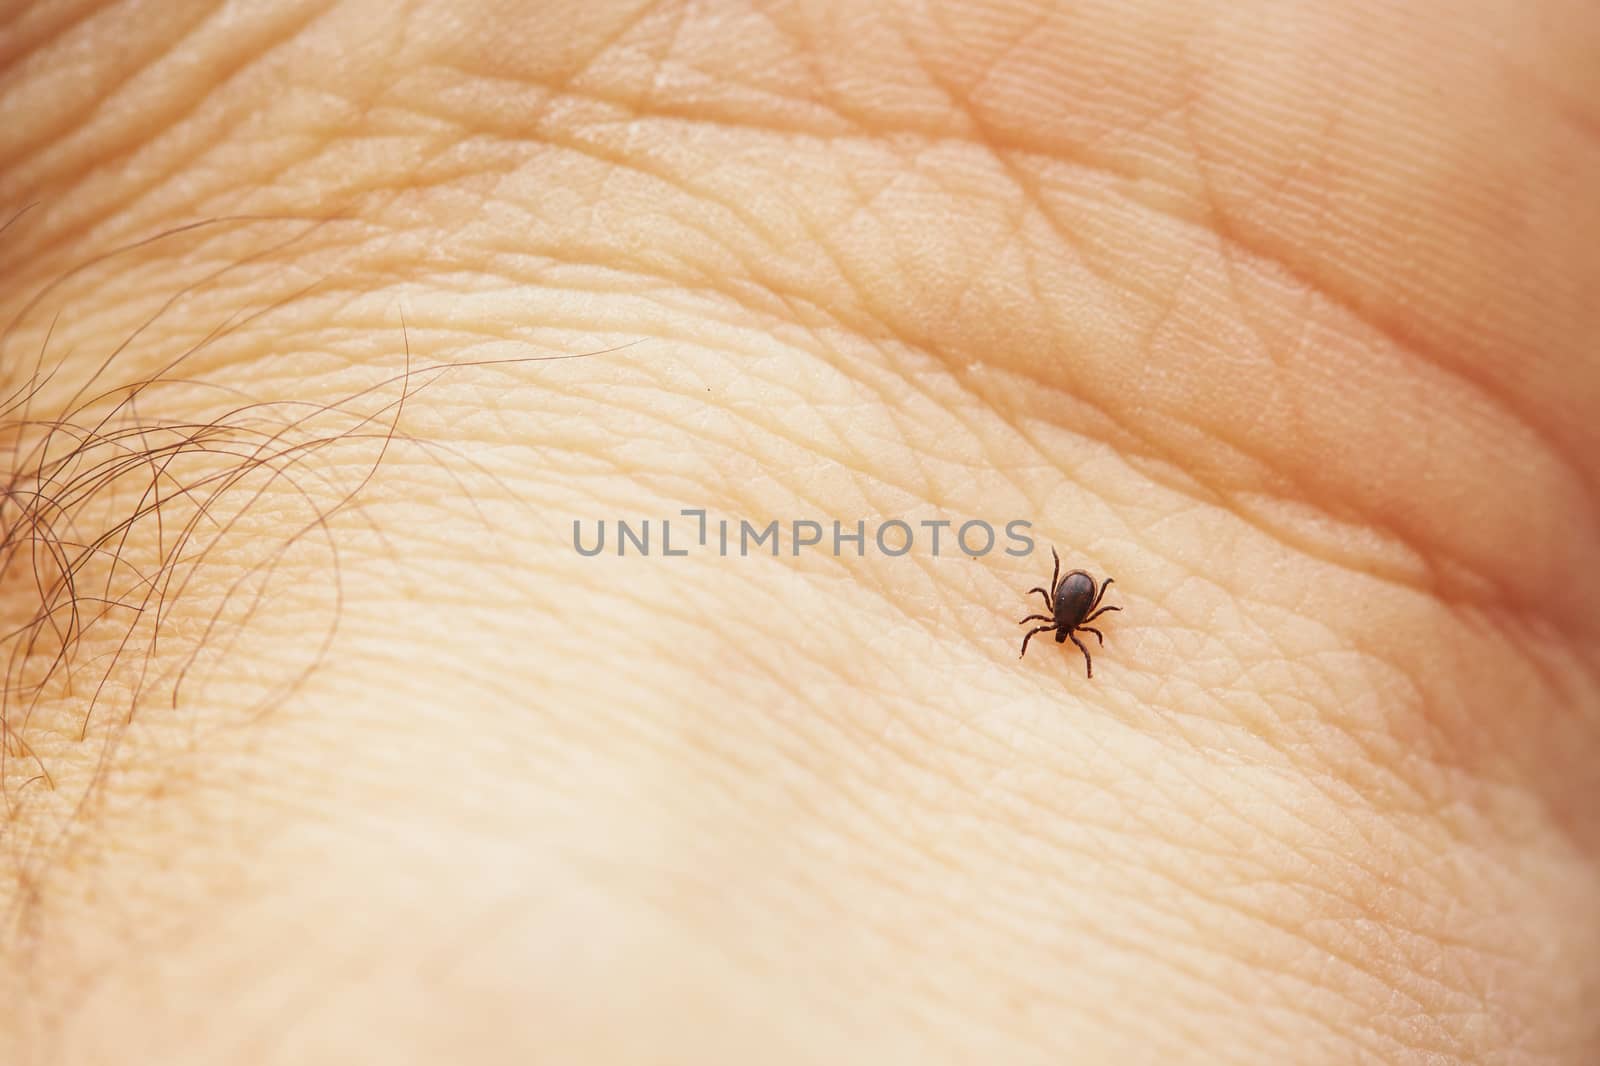 Tick is crawling on the human palm